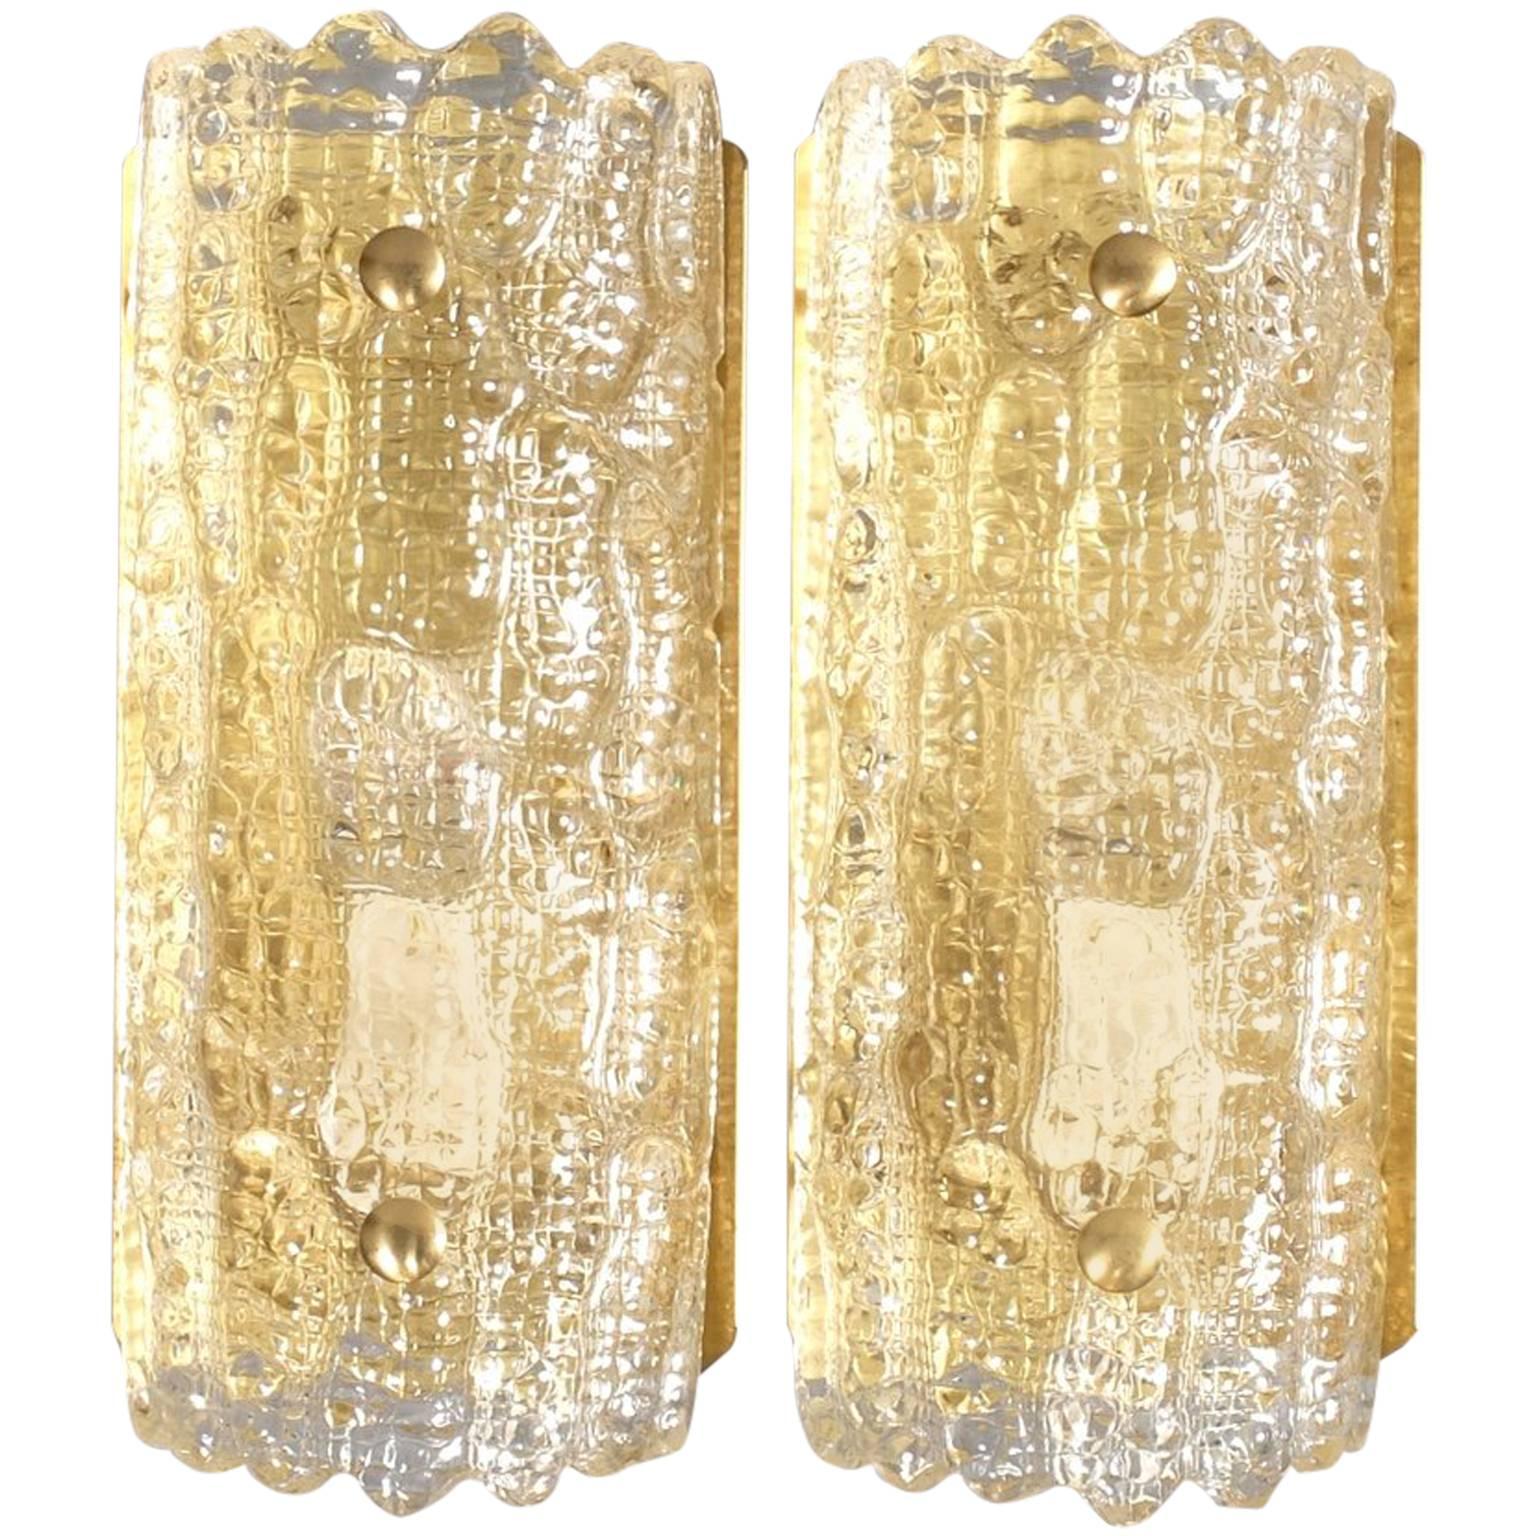 1960s Wall Sconces, Designed by Carl Fagerlund, Swedish Orrefors Glass, Lyfa